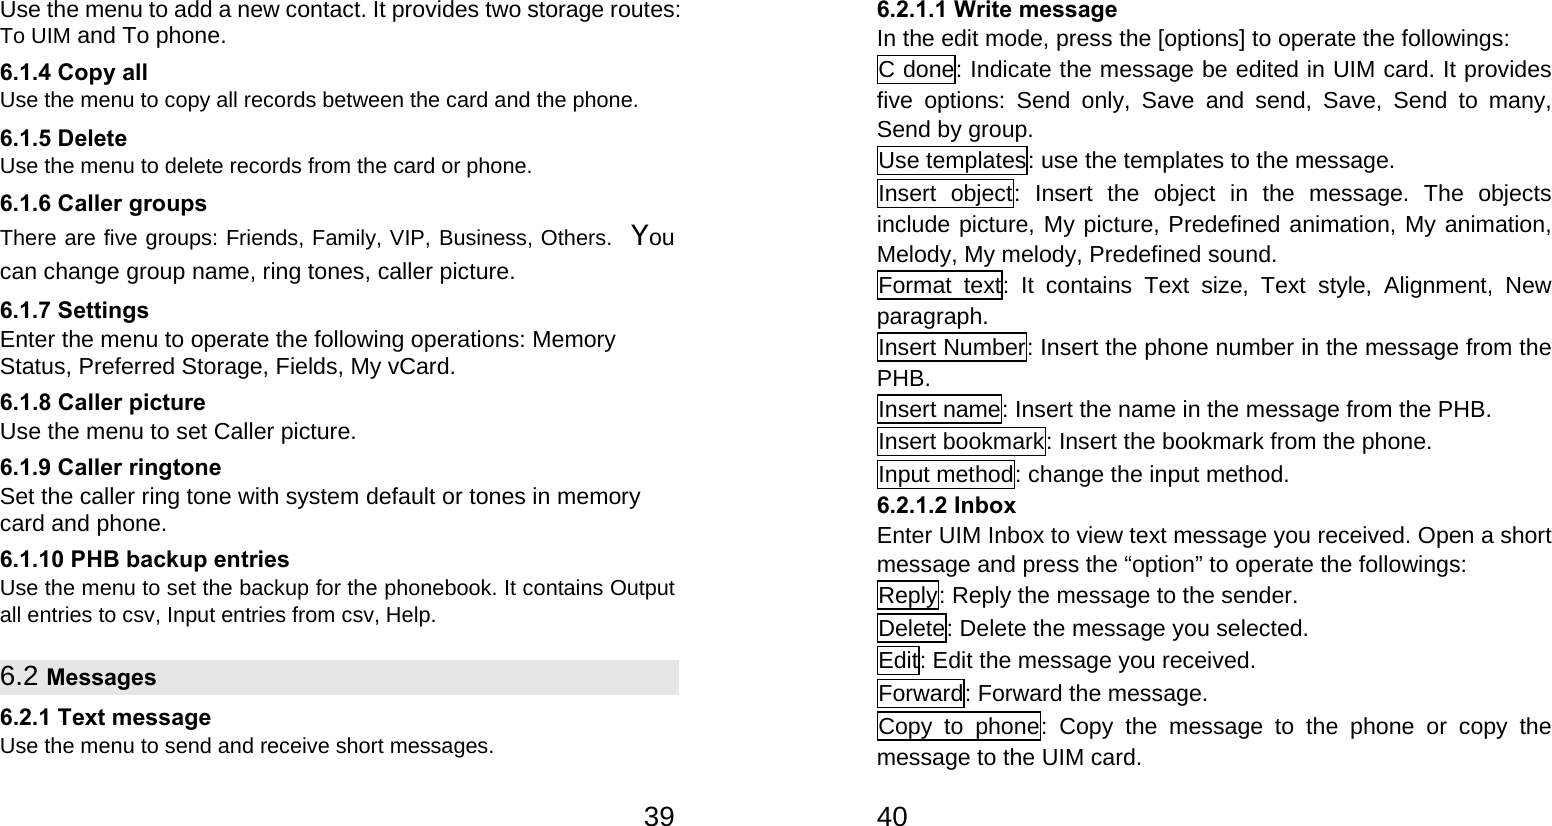   39Use the menu to add a new contact. It provides two storage routes: To UIM and To phone. 6.1.4 Copy all Use the menu to copy all records between the card and the phone. 6.1.5 Delete Use the menu to delete records from the card or phone. 6.1.6 Caller groups There are five groups: Friends, Family, VIP, Business, Others. You can change group name, ring tones, caller picture. 6.1.7 Settings Enter the menu to operate the following operations: Memory Status, Preferred Storage, Fields, My vCard. 6.1.8 Caller picture Use the menu to set Caller picture. 6.1.9 Caller ringtone Set the caller ring tone with system default or tones in memory card and phone. 6.1.10 PHB backup entries Use the menu to set the backup for the phonebook. It contains Output all entries to csv, Input entries from csv, Help. 6.2 Messages 6.2.1 Text message Use the menu to send and receive short messages.   406.2.1.1 Write message In the edit mode, press the [options] to operate the followings: C done: Indicate the message be edited in UIM card. It provides five options: Send only, Save and send, Save, Send to many, Send by group. Use templates: use the templates to the message. Insert object: Insert the object in the message. The objects include picture, My picture, Predefined animation, My animation, Melody, My melody, Predefined sound. Format text: It contains Text size, Text style, Alignment, New paragraph. Insert Number: Insert the phone number in the message from the PHB. Insert name: Insert the name in the message from the PHB. Insert bookmark: Insert the bookmark from the phone. Input method: change the input method. 6.2.1.2 Inbox Enter UIM Inbox to view text message you received. Open a short message and press the “option” to operate the followings: Reply: Reply the message to the sender. Delete: Delete the message you selected. Edit: Edit the message you received. Forward: Forward the message. Copy to phone: Copy the message to the phone or copy the message to the UIM card. 